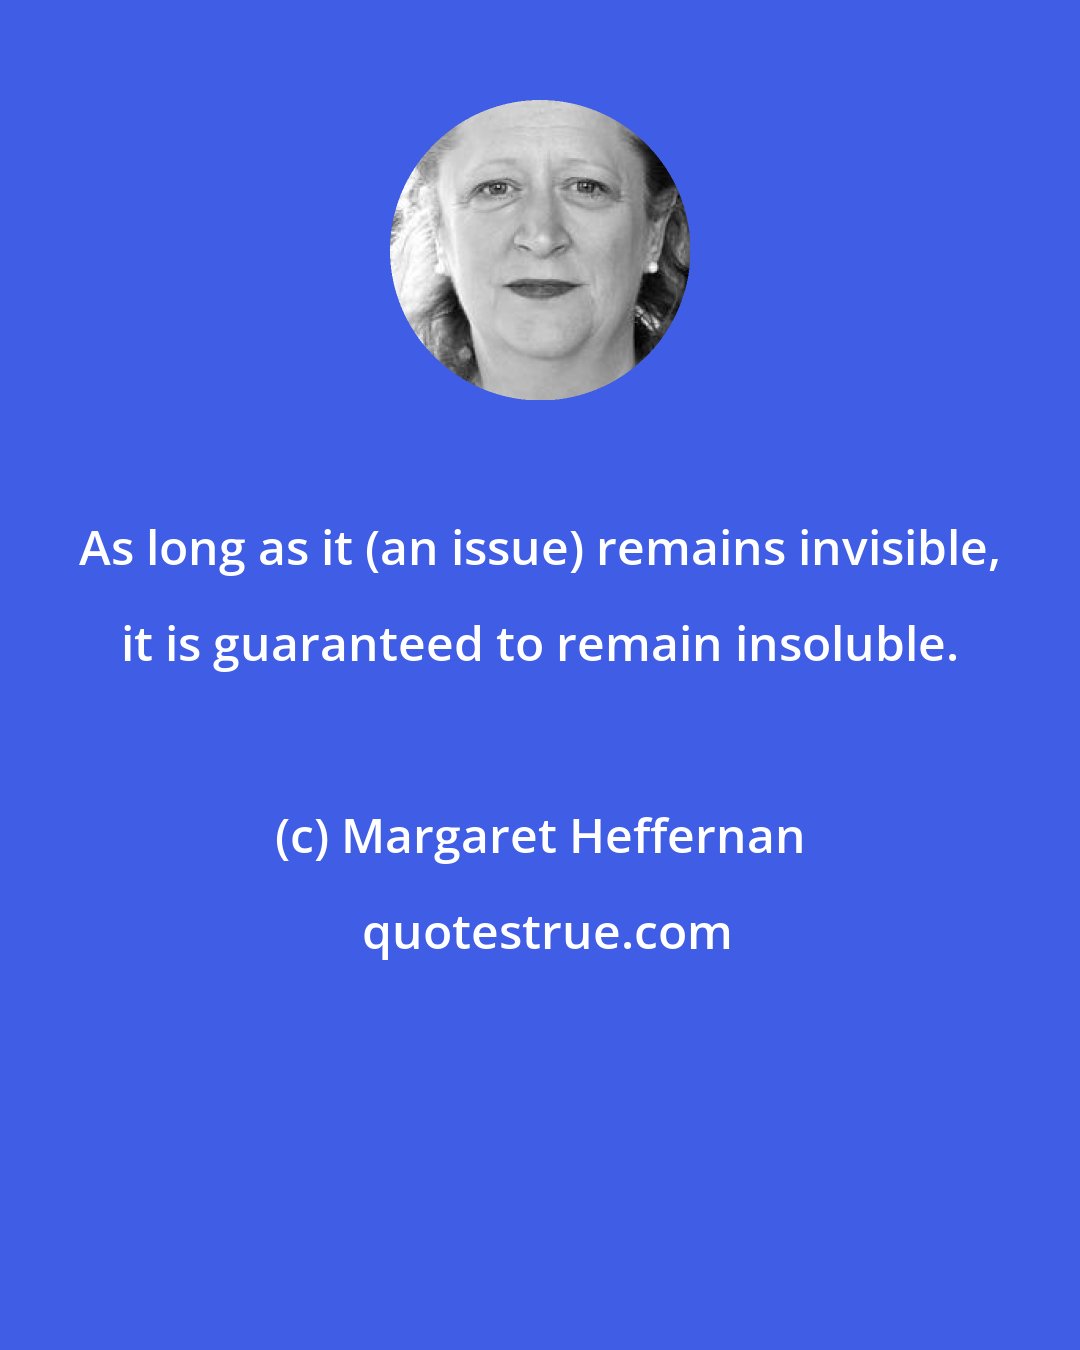 Margaret Heffernan: As long as it (an issue) remains invisible, it is guaranteed to remain insoluble.